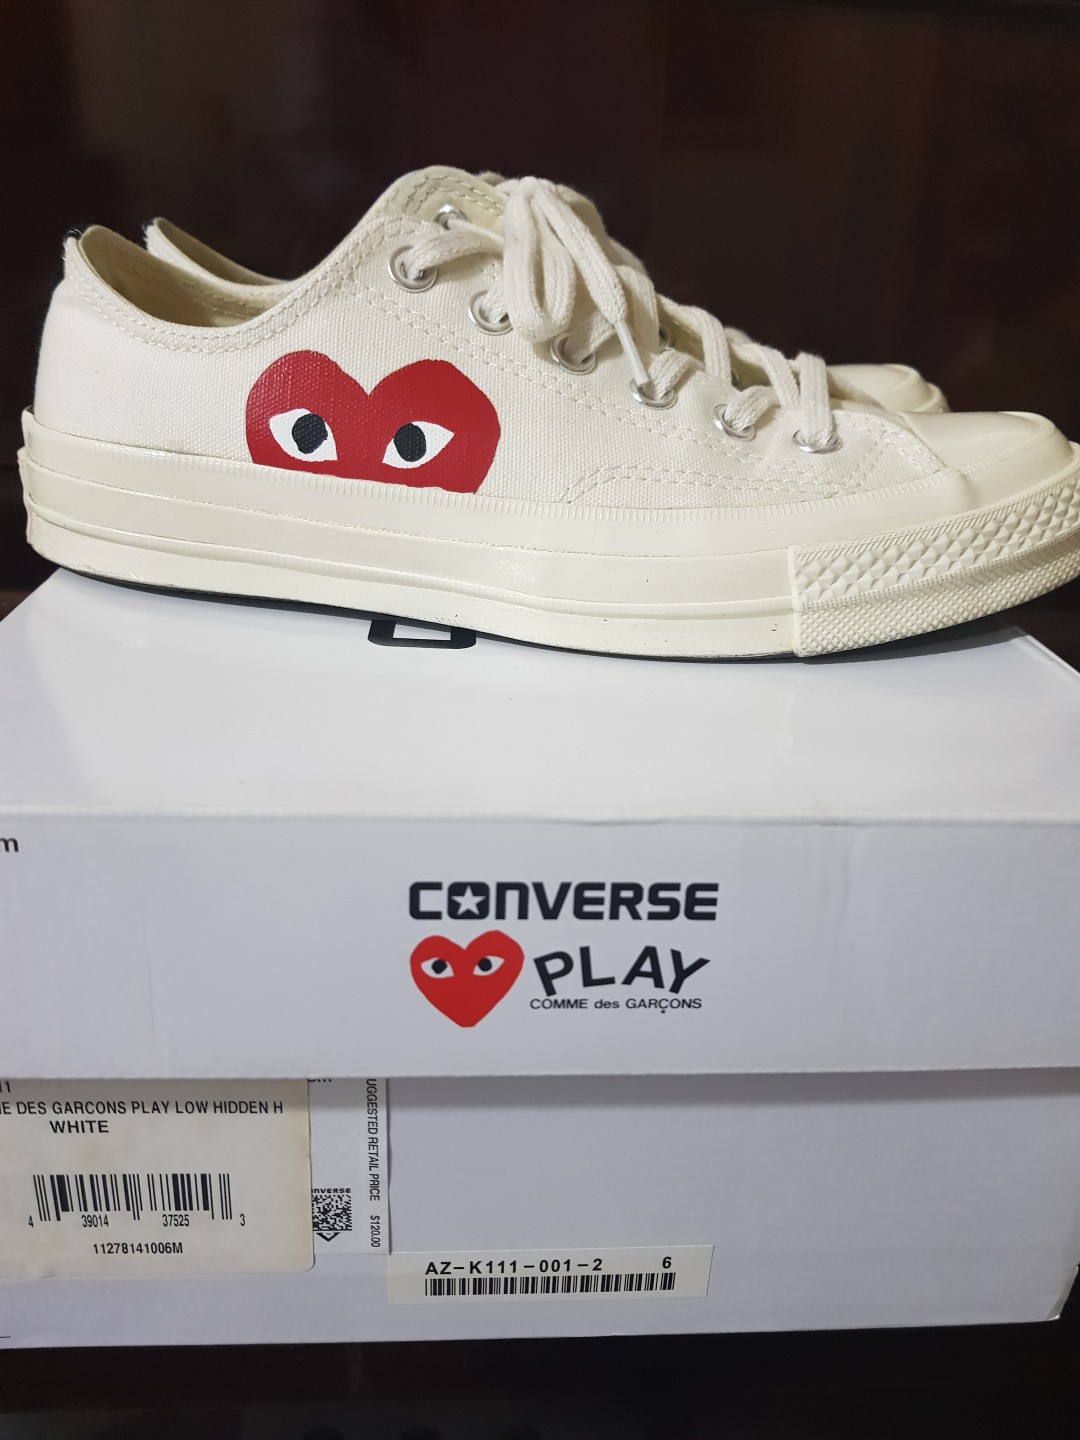 converse play shoes price